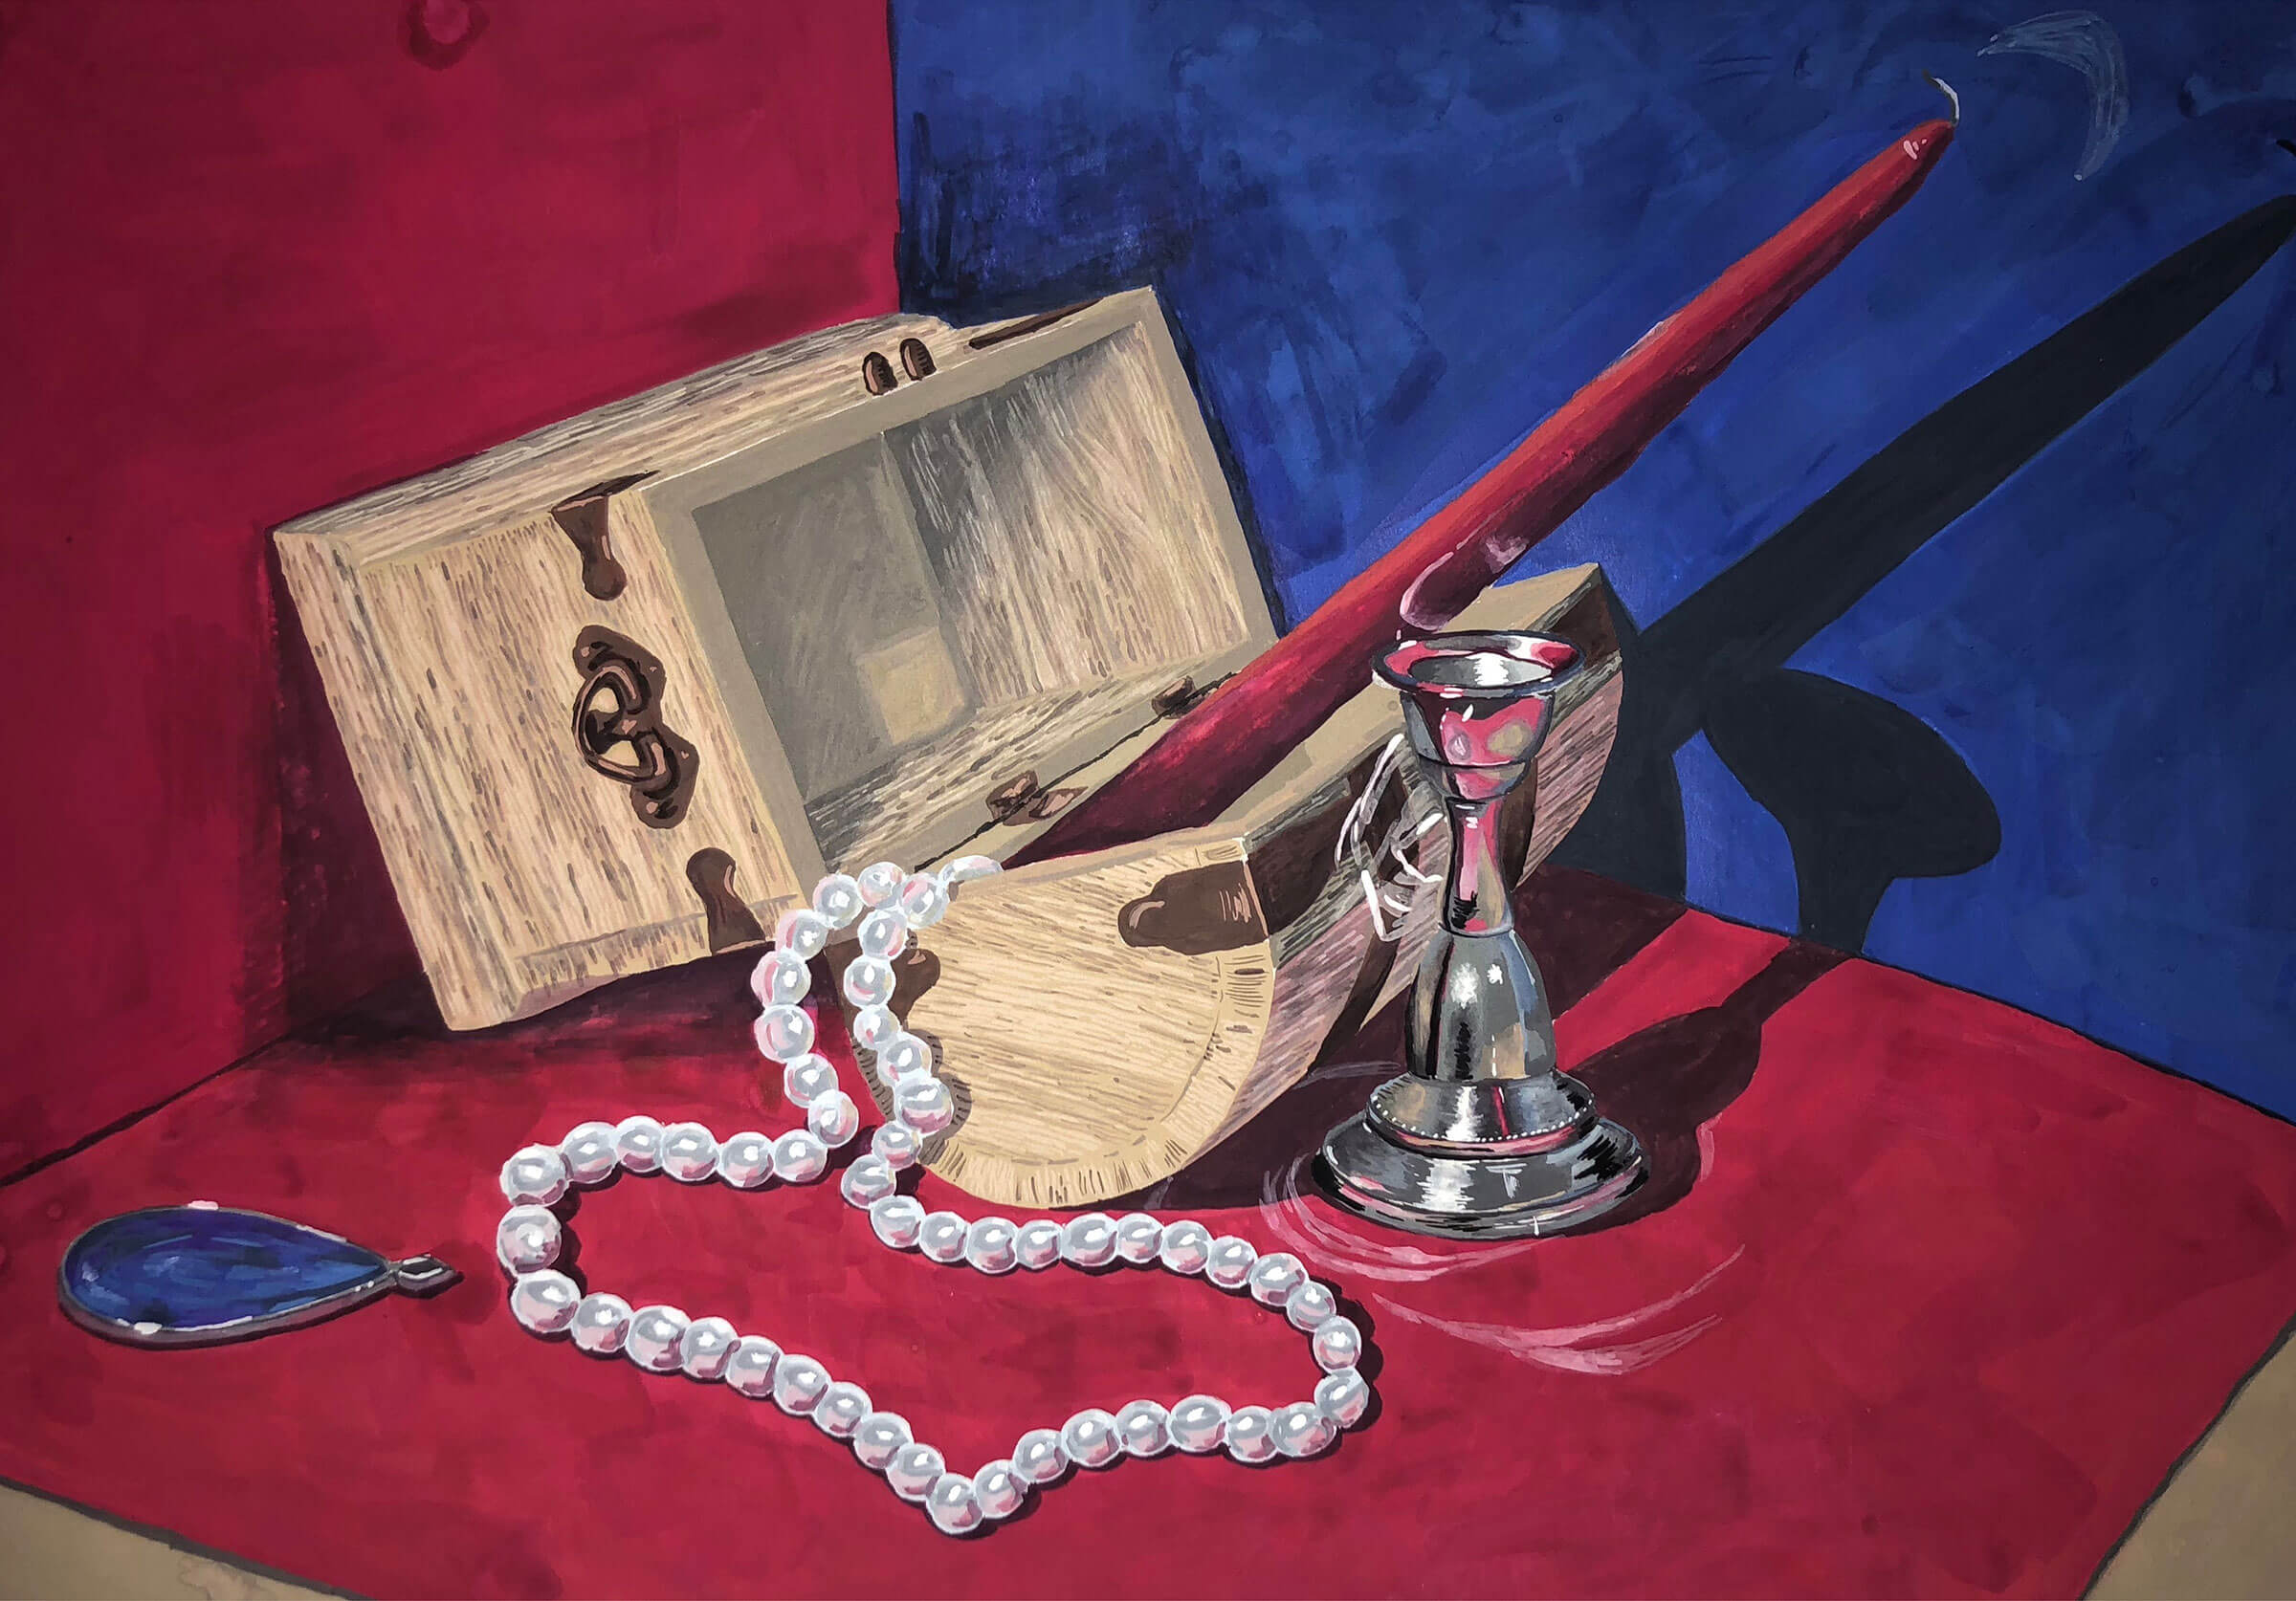 An open treasure chest with a red candle and pearl necklace